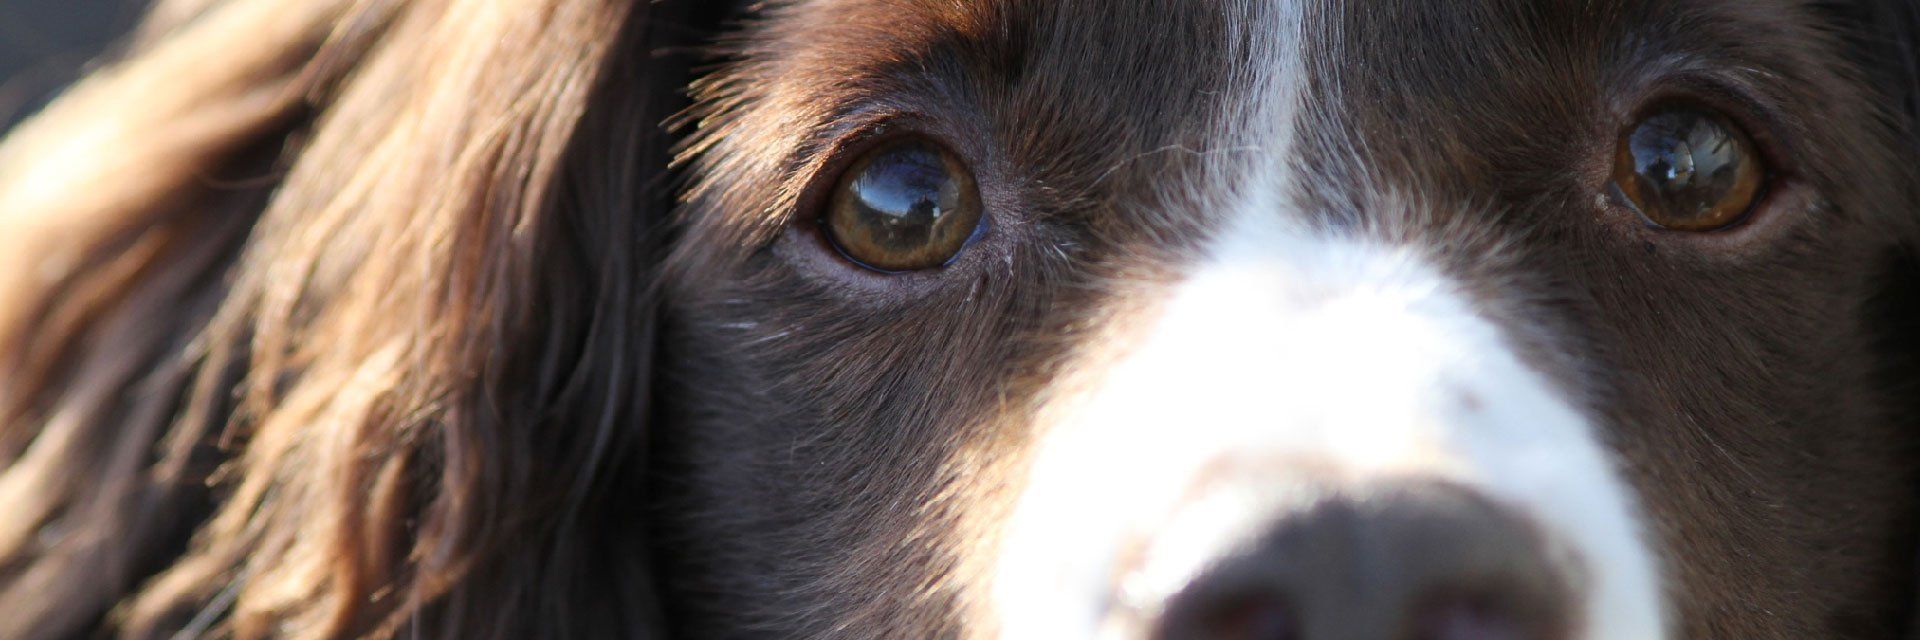 closer view of the dog's eyes